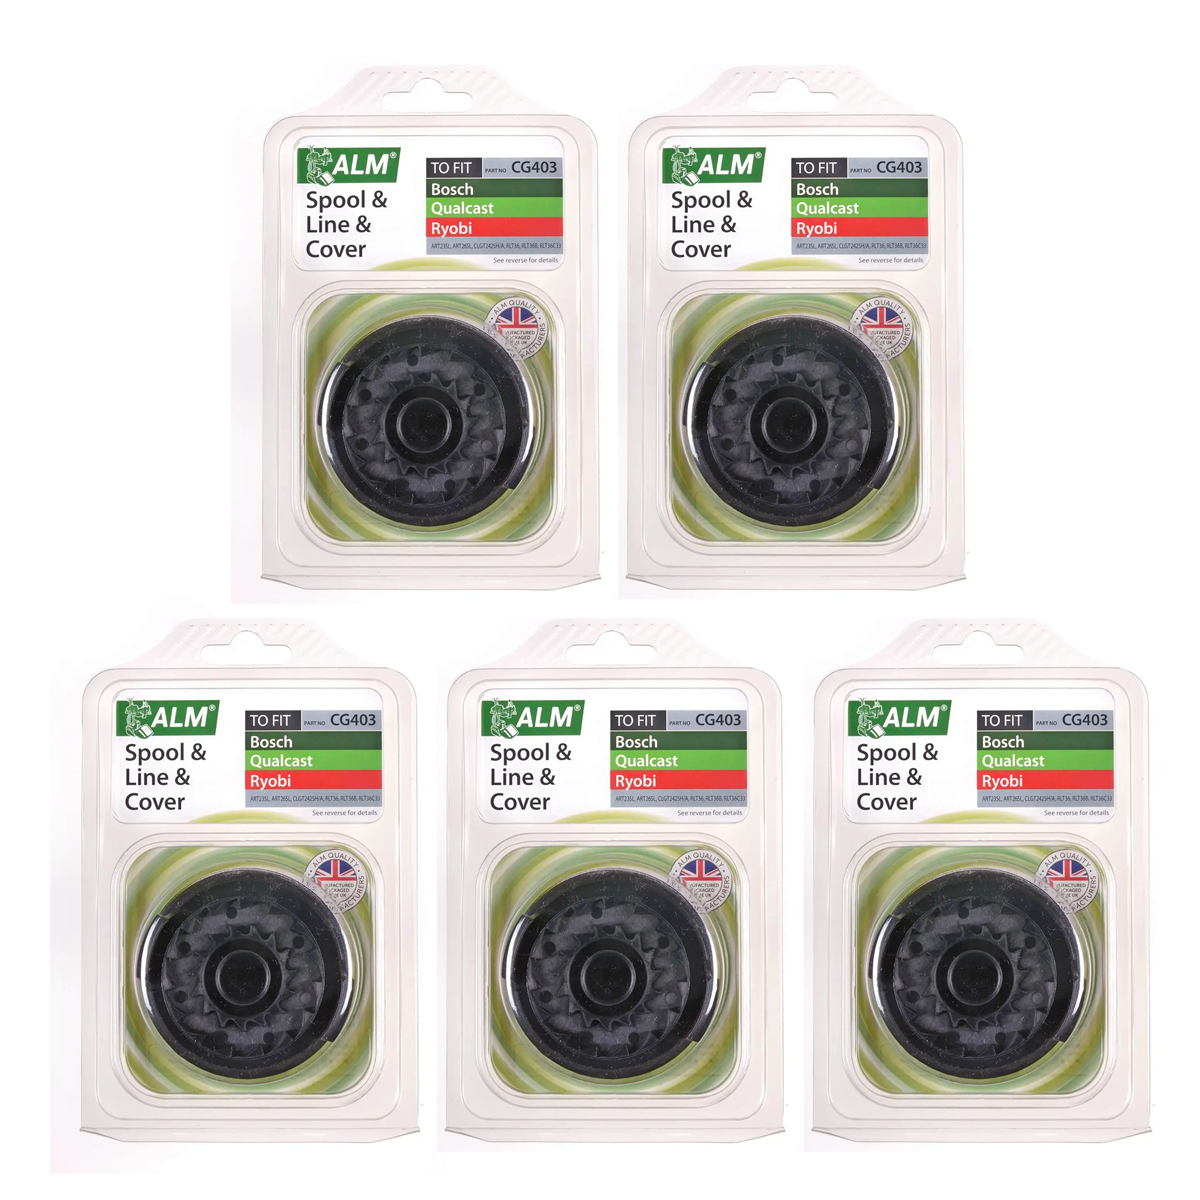 Case of 5 x ALM CG403 Replacement Spool, Line and Cover for Bosch, Qualcast, Ryobi and Others